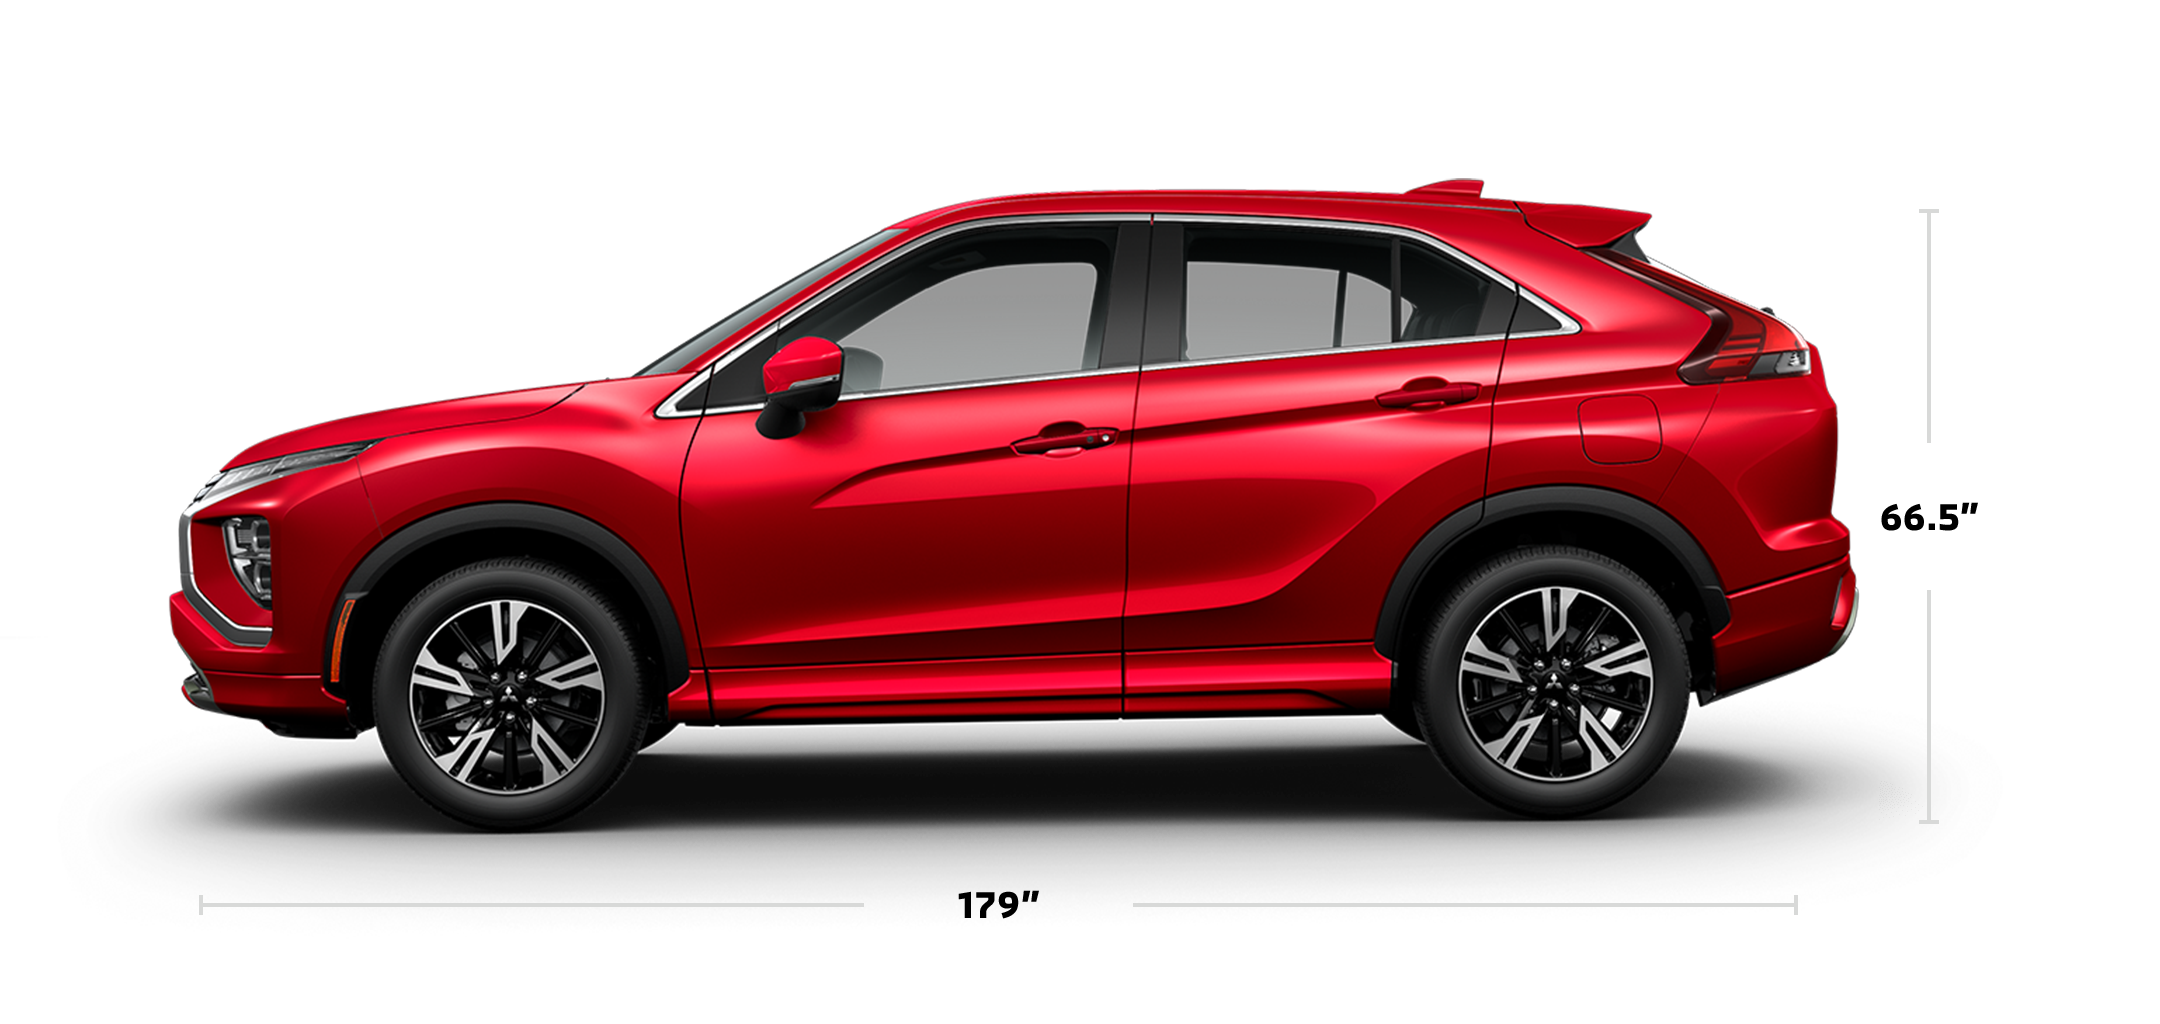 Length and height dimensions of the 2023 / 2024 Mitsubishi Eclipse Cross SUV